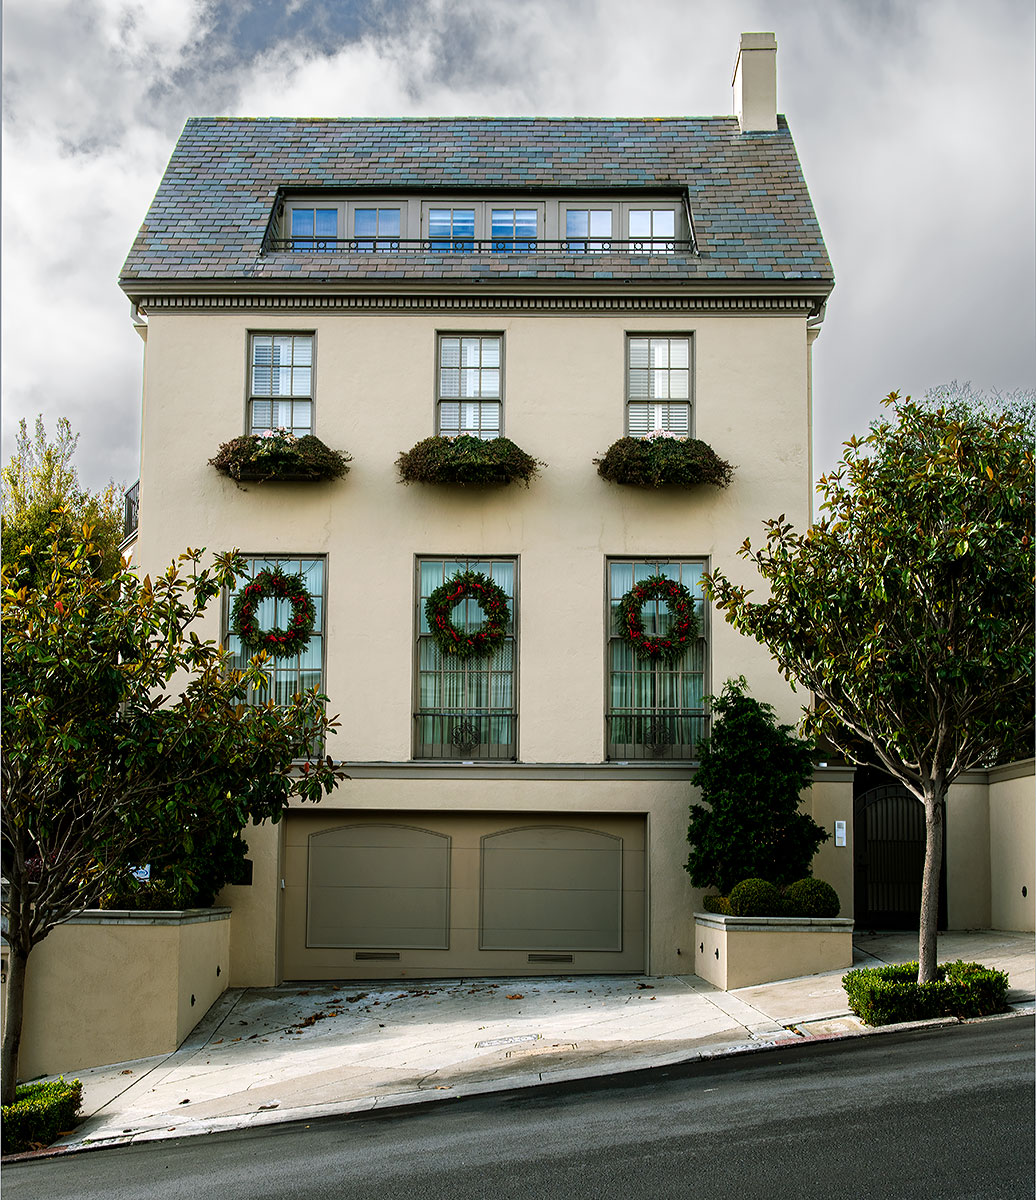 2233 Lyon Street in Pacific Heights was designed by Bliss & Faville and built in 1921.